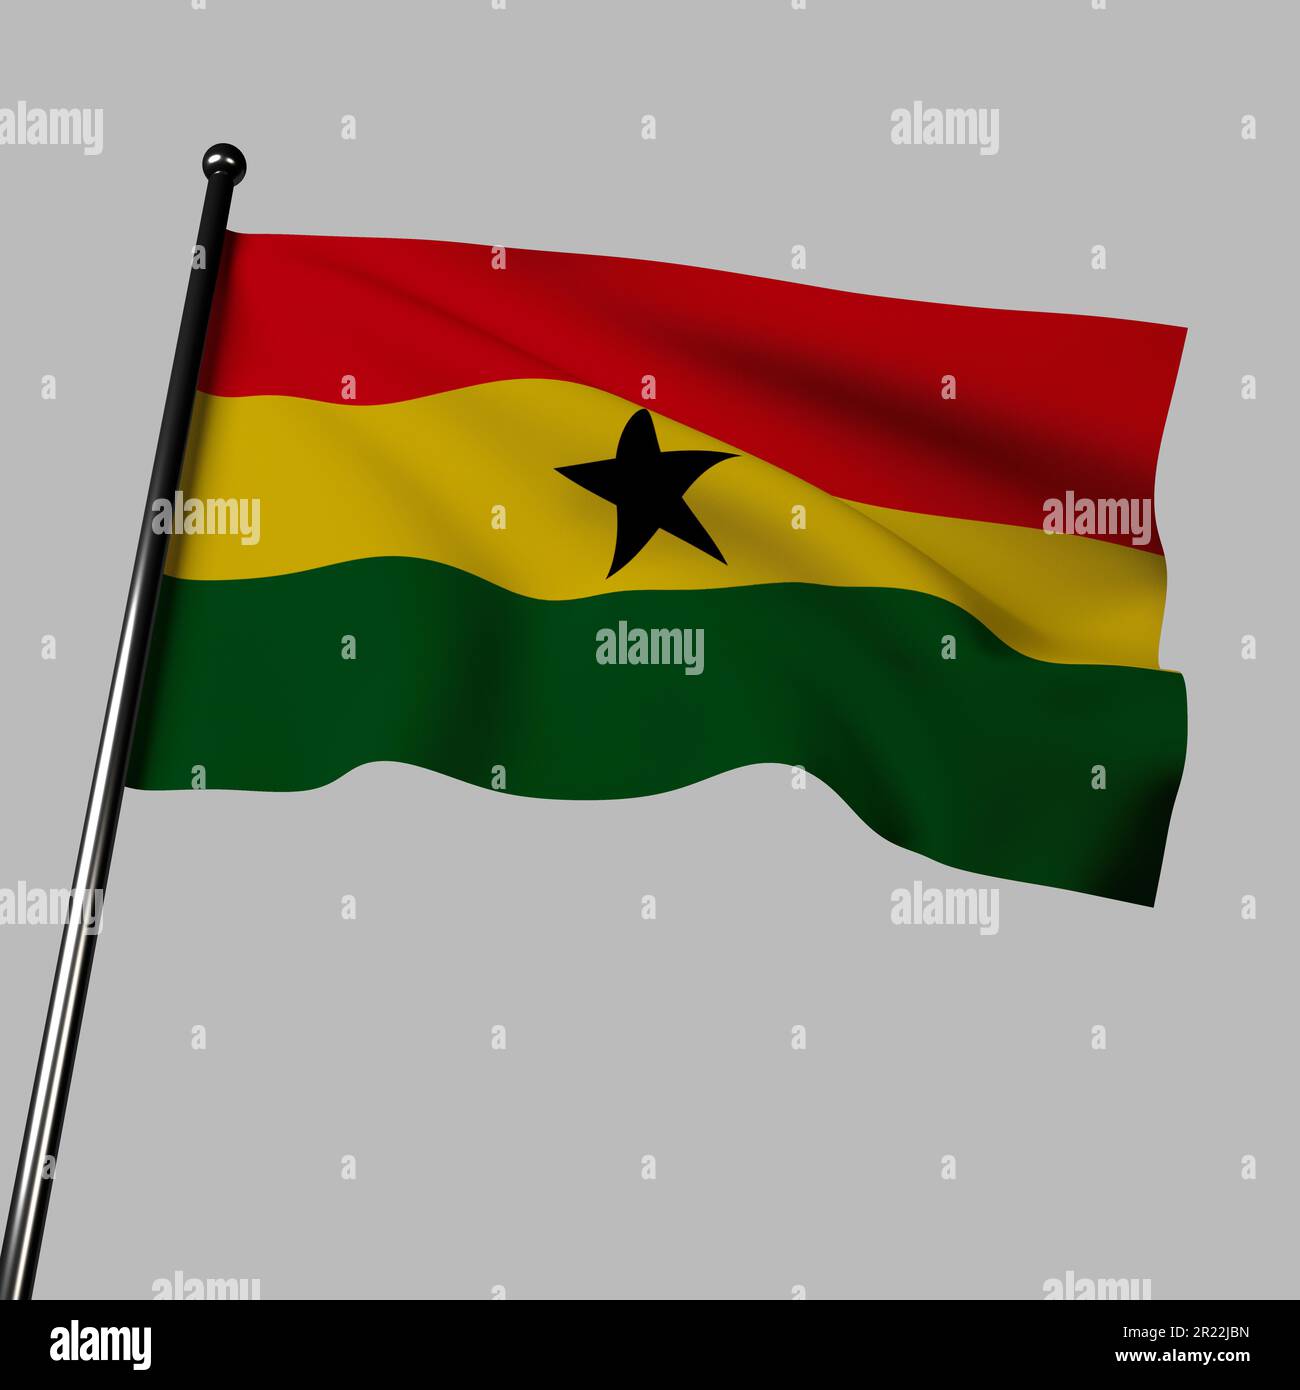 3D Ghana flag on gray background. Red, yellow, green stripes with black star in the center. Red represents blood shed for independence, yellow symboli Stock Photo